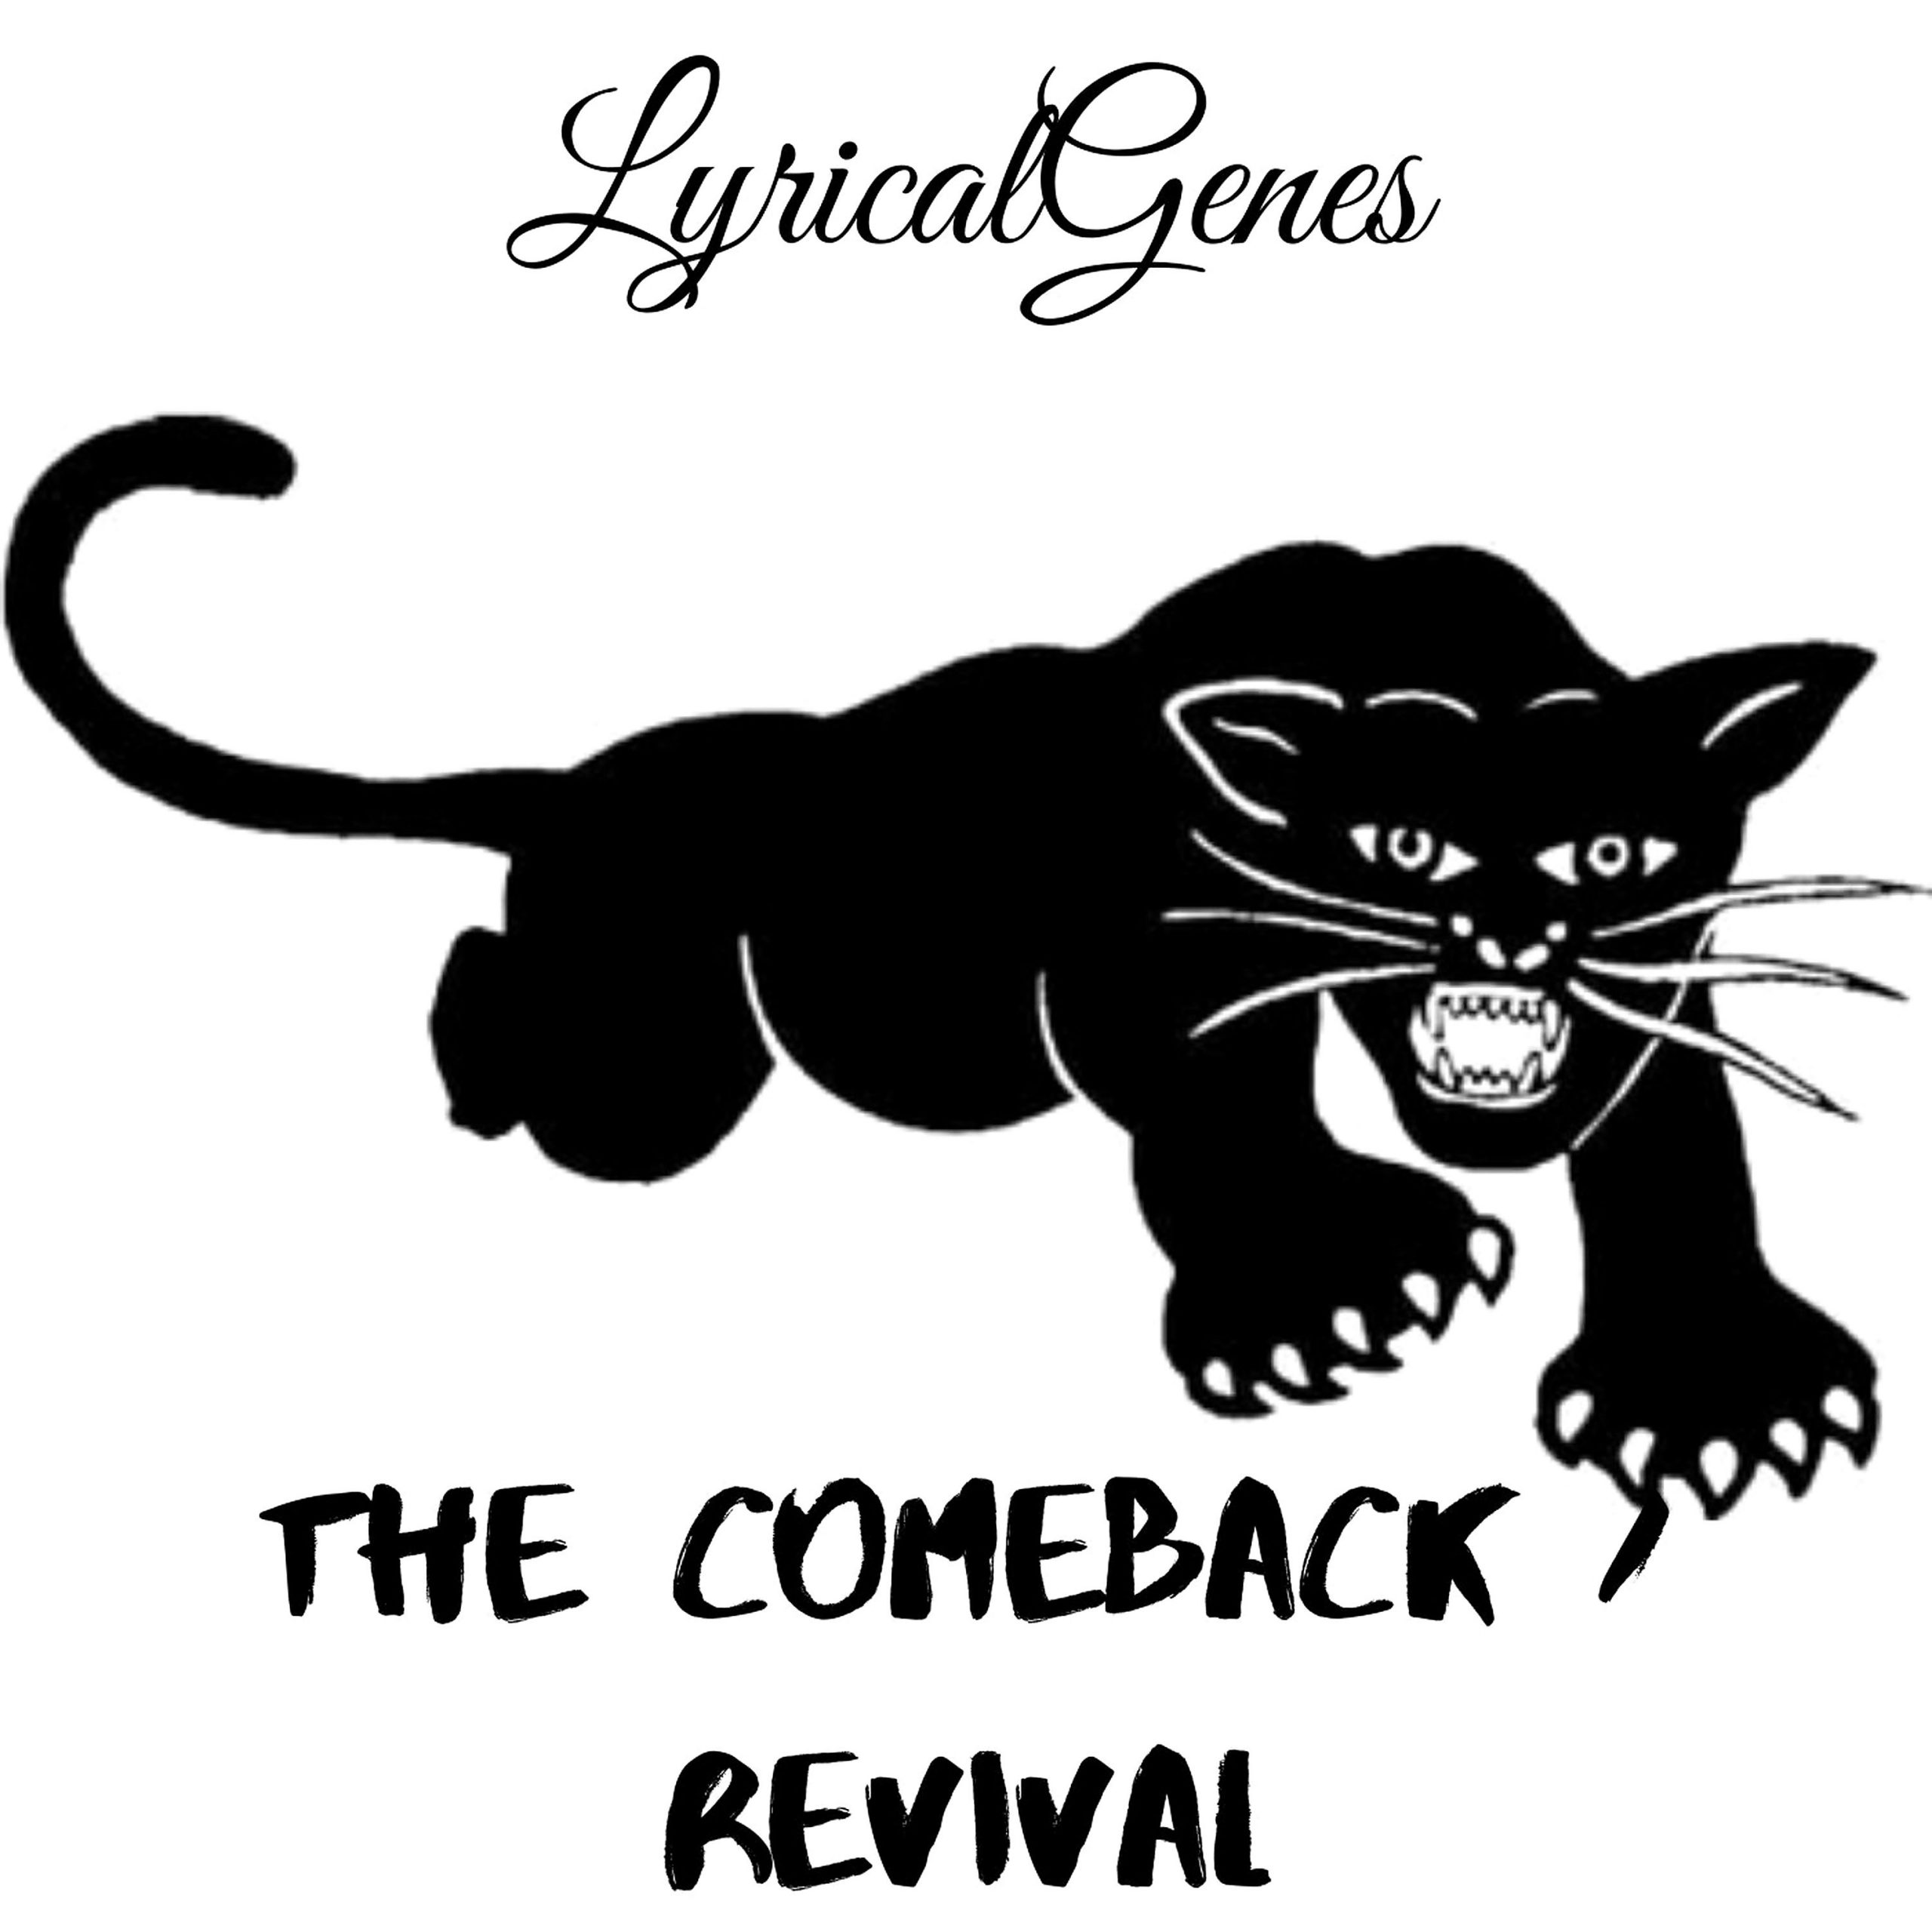 LyricalGenes Advocates Power to the People "The Comeback / Revival"